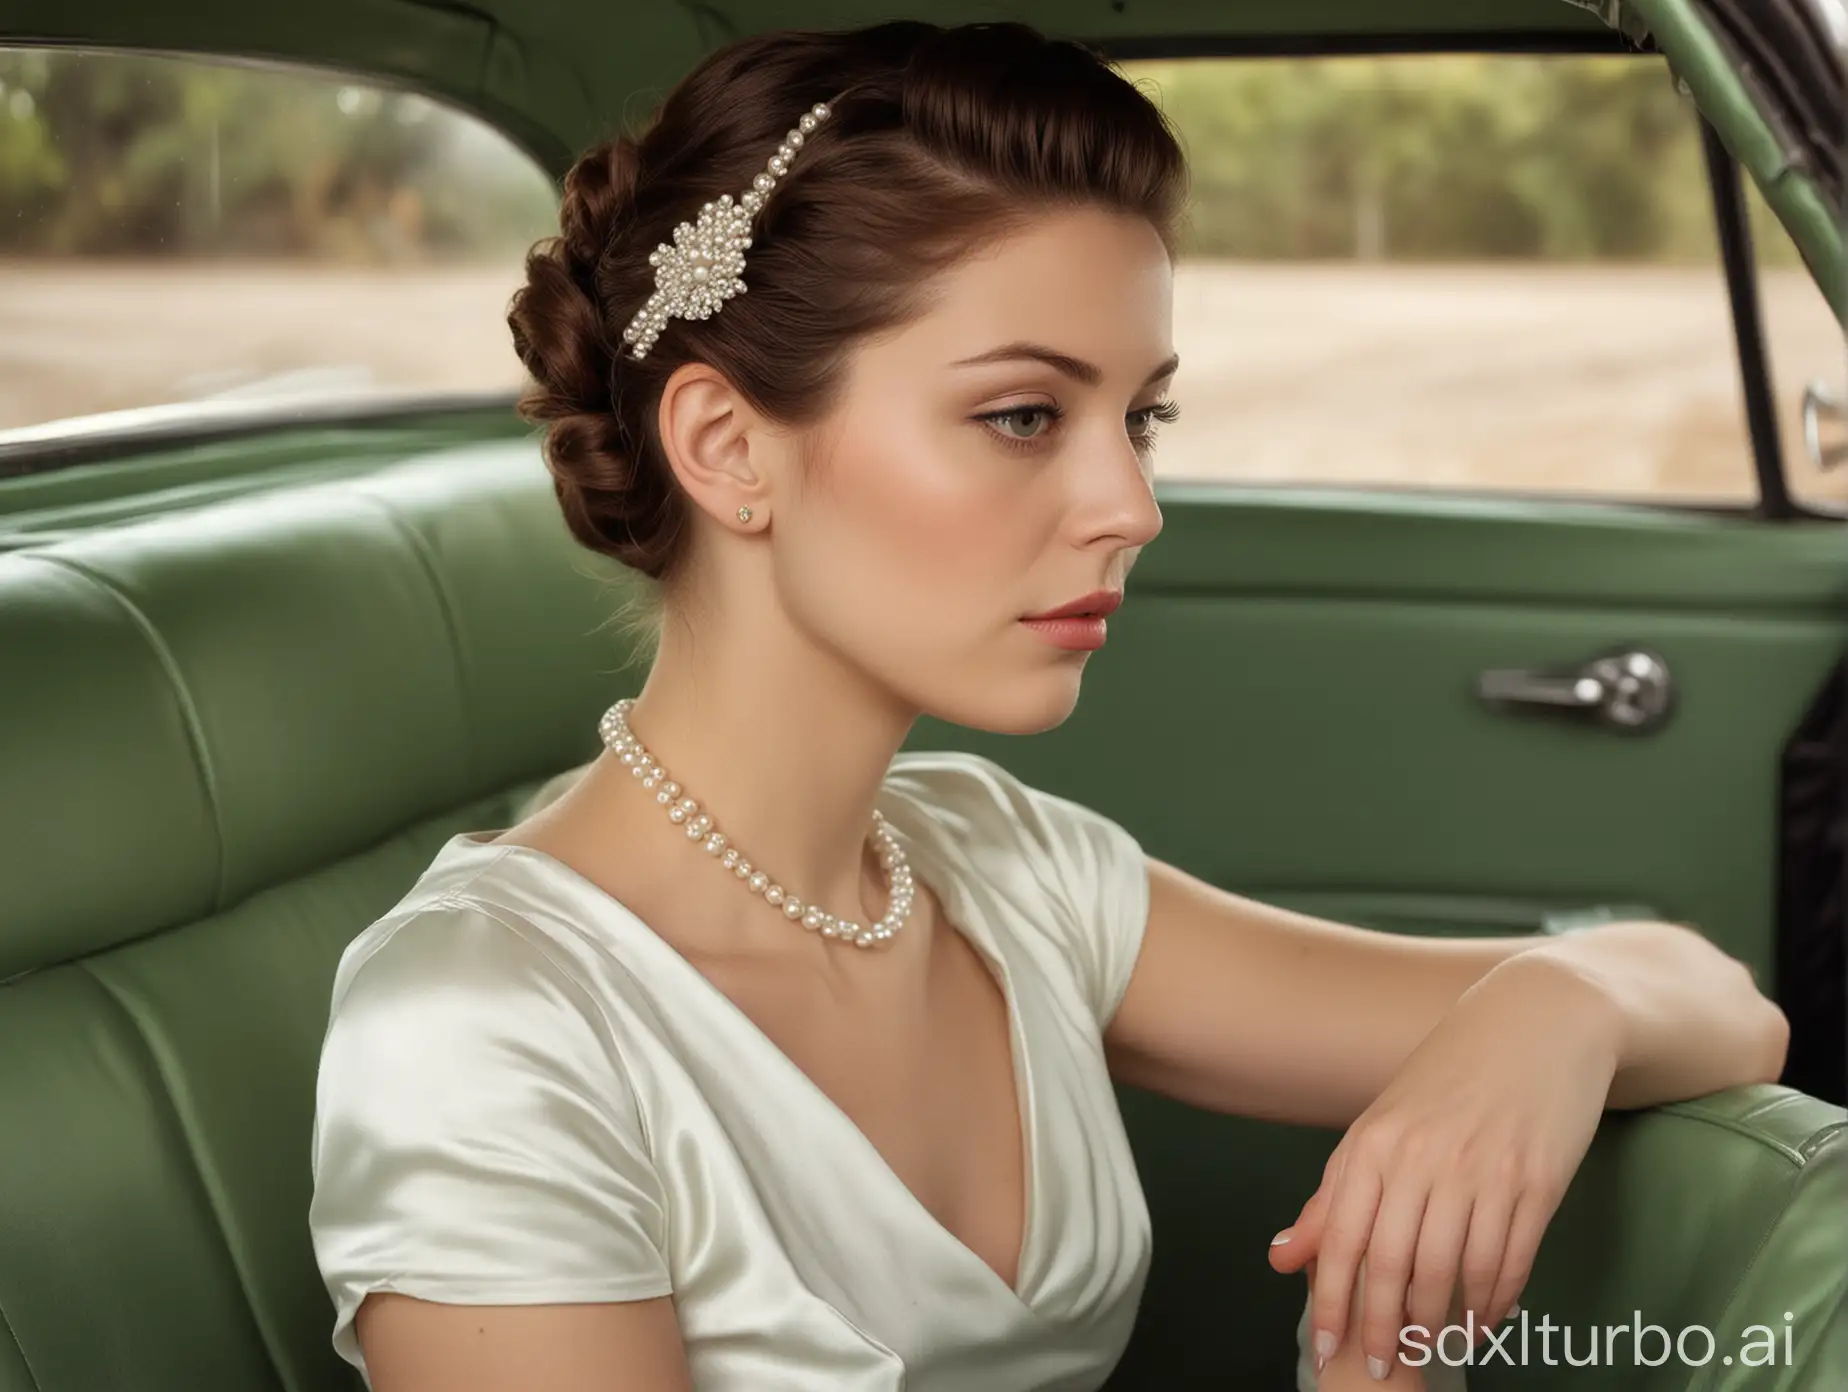 Elegant-Woman-in-Vintage-Car-Serenity-and-Style-in-a-Green-Vehicle